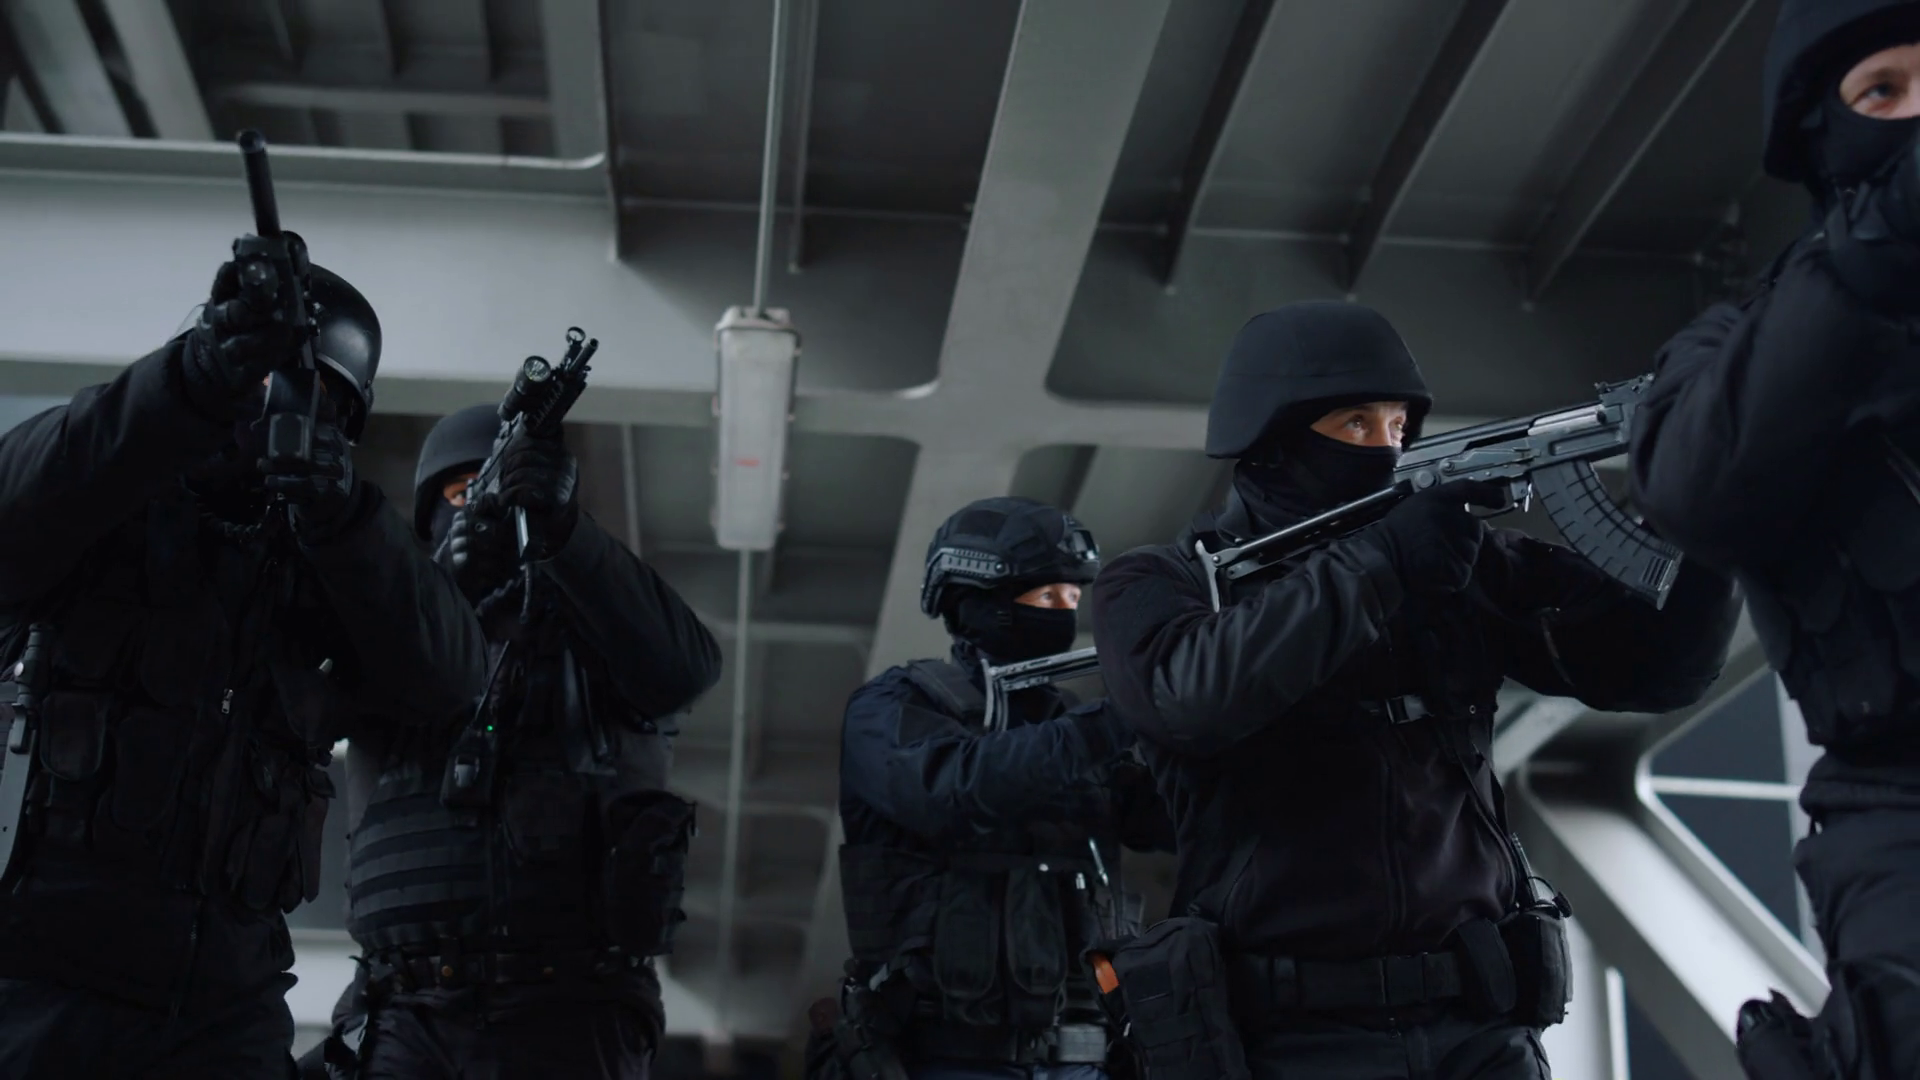 Special Ops Police Team Protecting Urban Building With Assault Rifles. Masked Military Soldiers Moving Forwards Along Construction Bridge. SWAT Team Members Looking At Scope Of Firearms Stock Video Footage 00:16 SBV 346484844